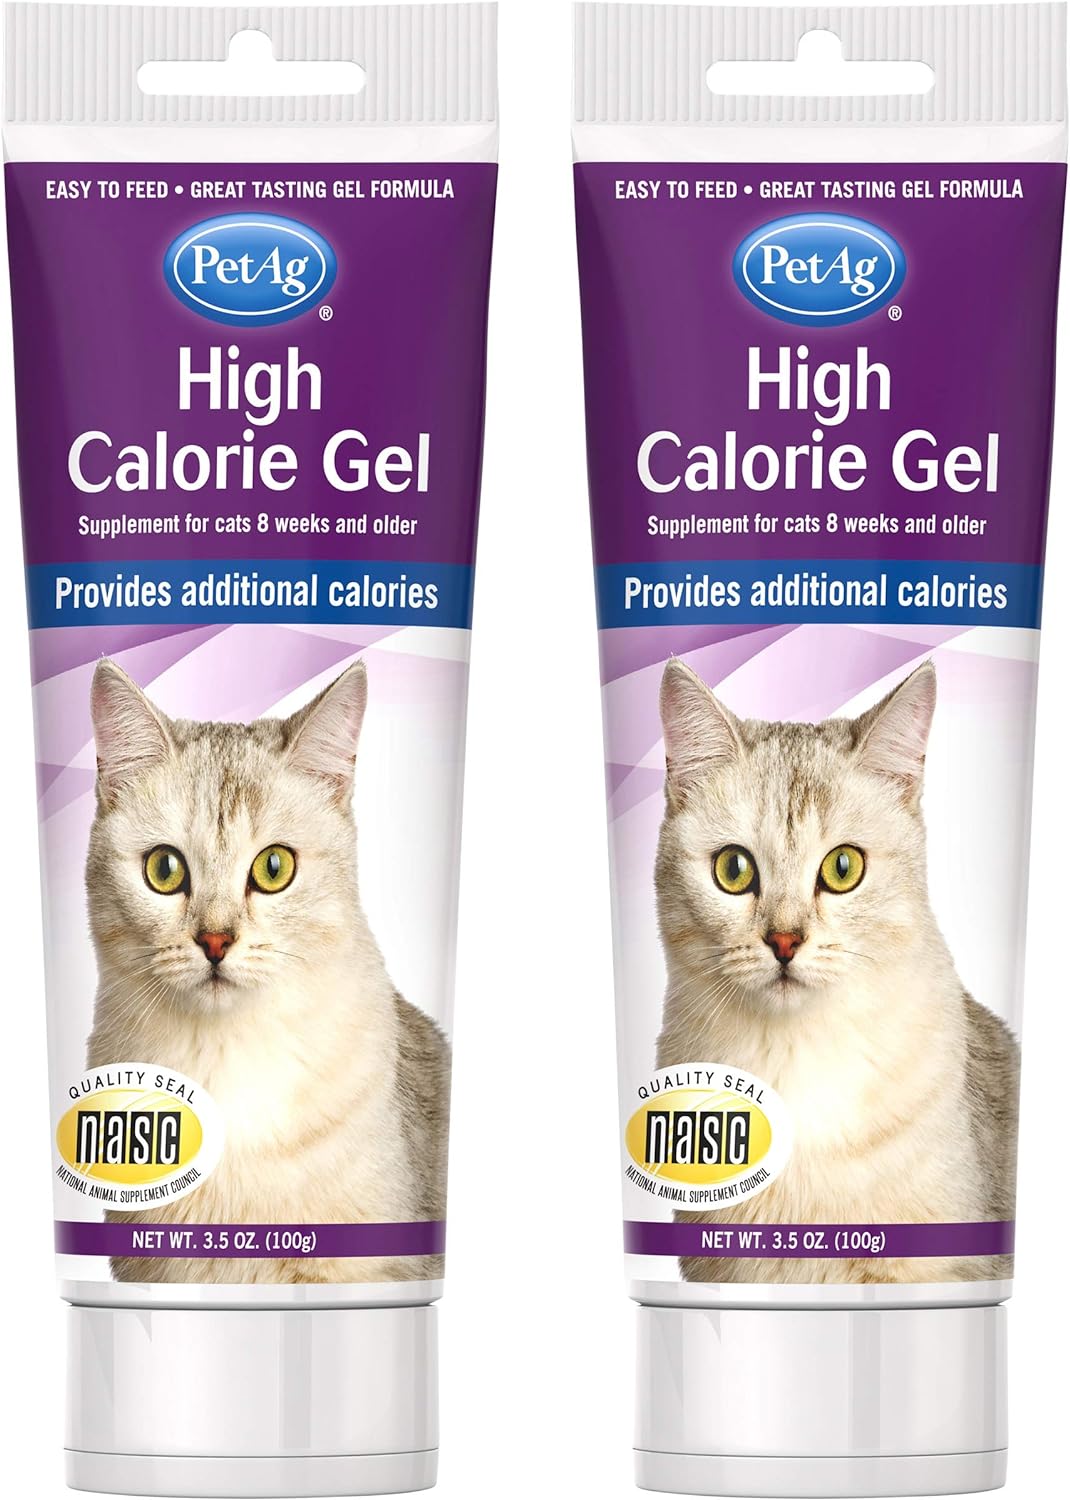 PetAg High Calorie Gel Supplement for Cats - Keep Cats at Optimal Performance Levels - 5 oz (2 Pack)